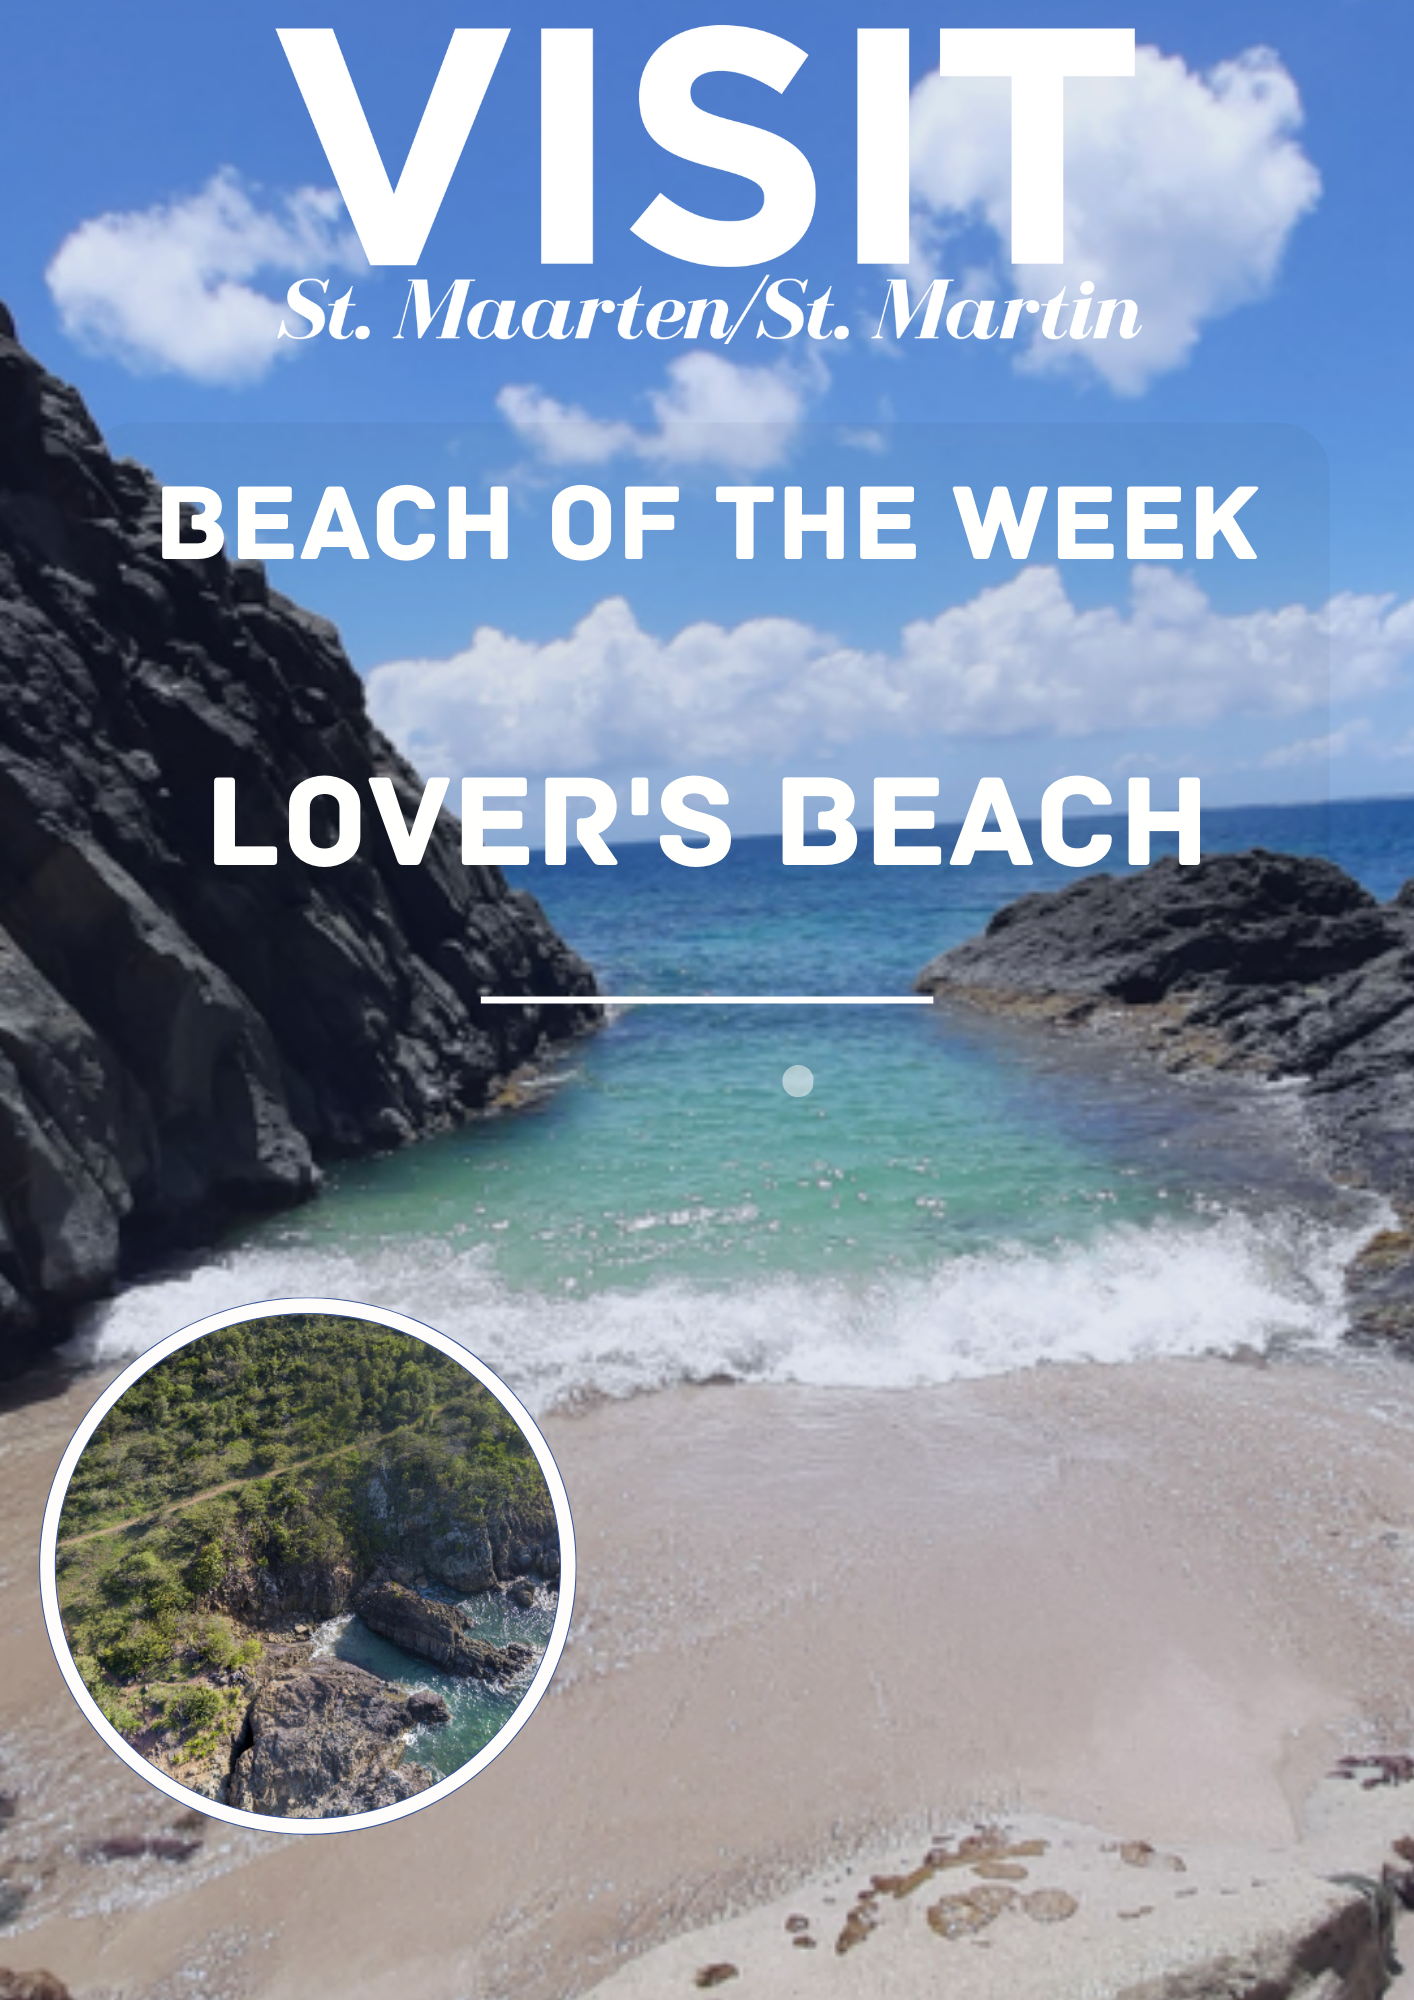 Lover's Beach is located on French side St. Martin